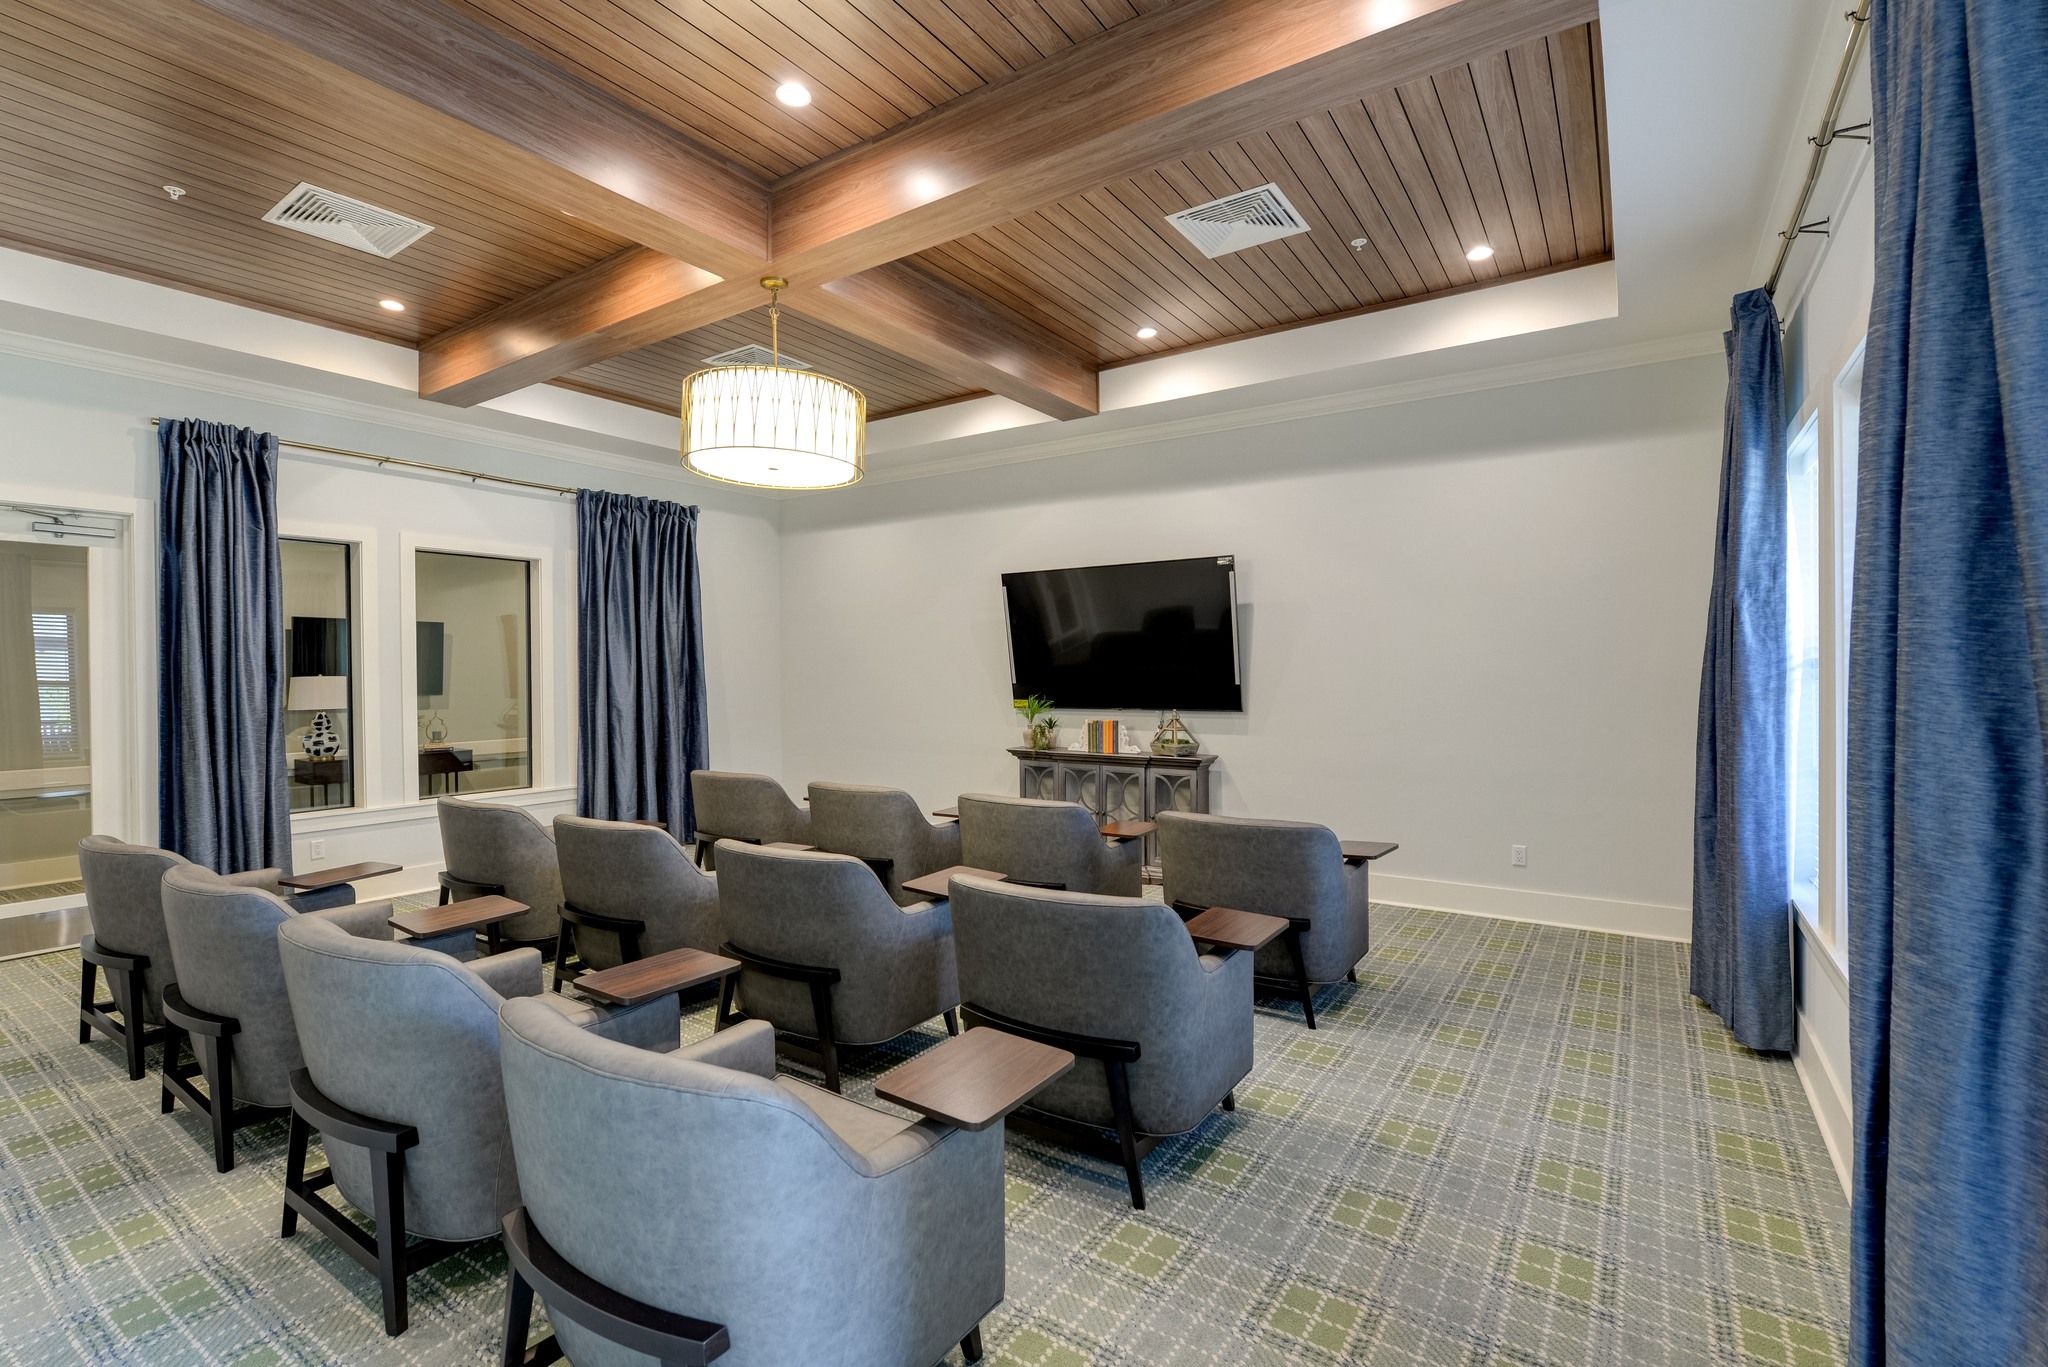 The Preserve at Meridian senior living community movie theater with big screen and surround sound